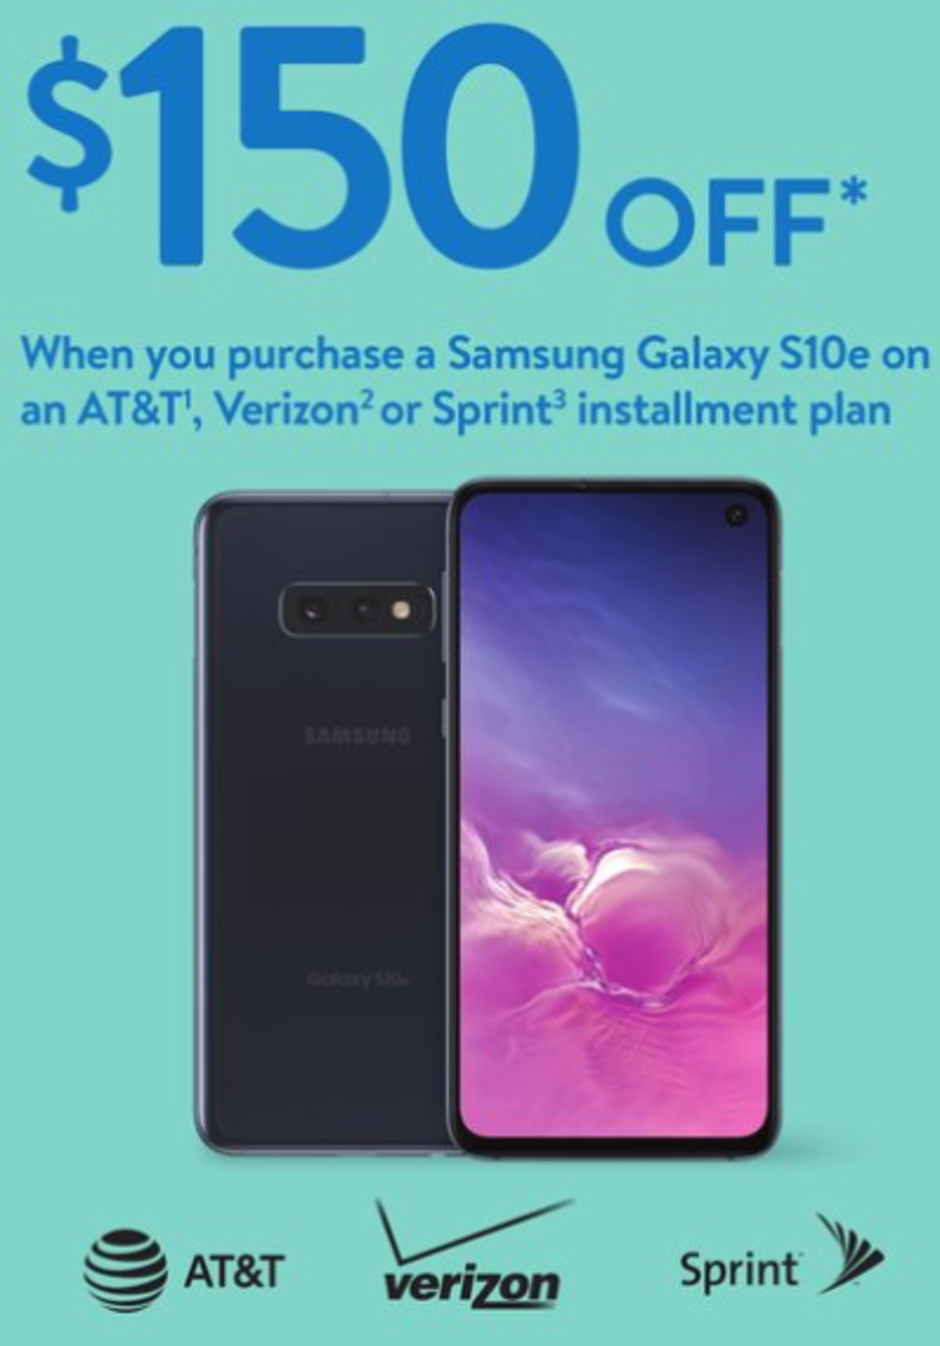 Deal: Samsung Galaxy S10e is $150 off at Walmart (with AT&T, Verizon, or Sprint monthly installments)